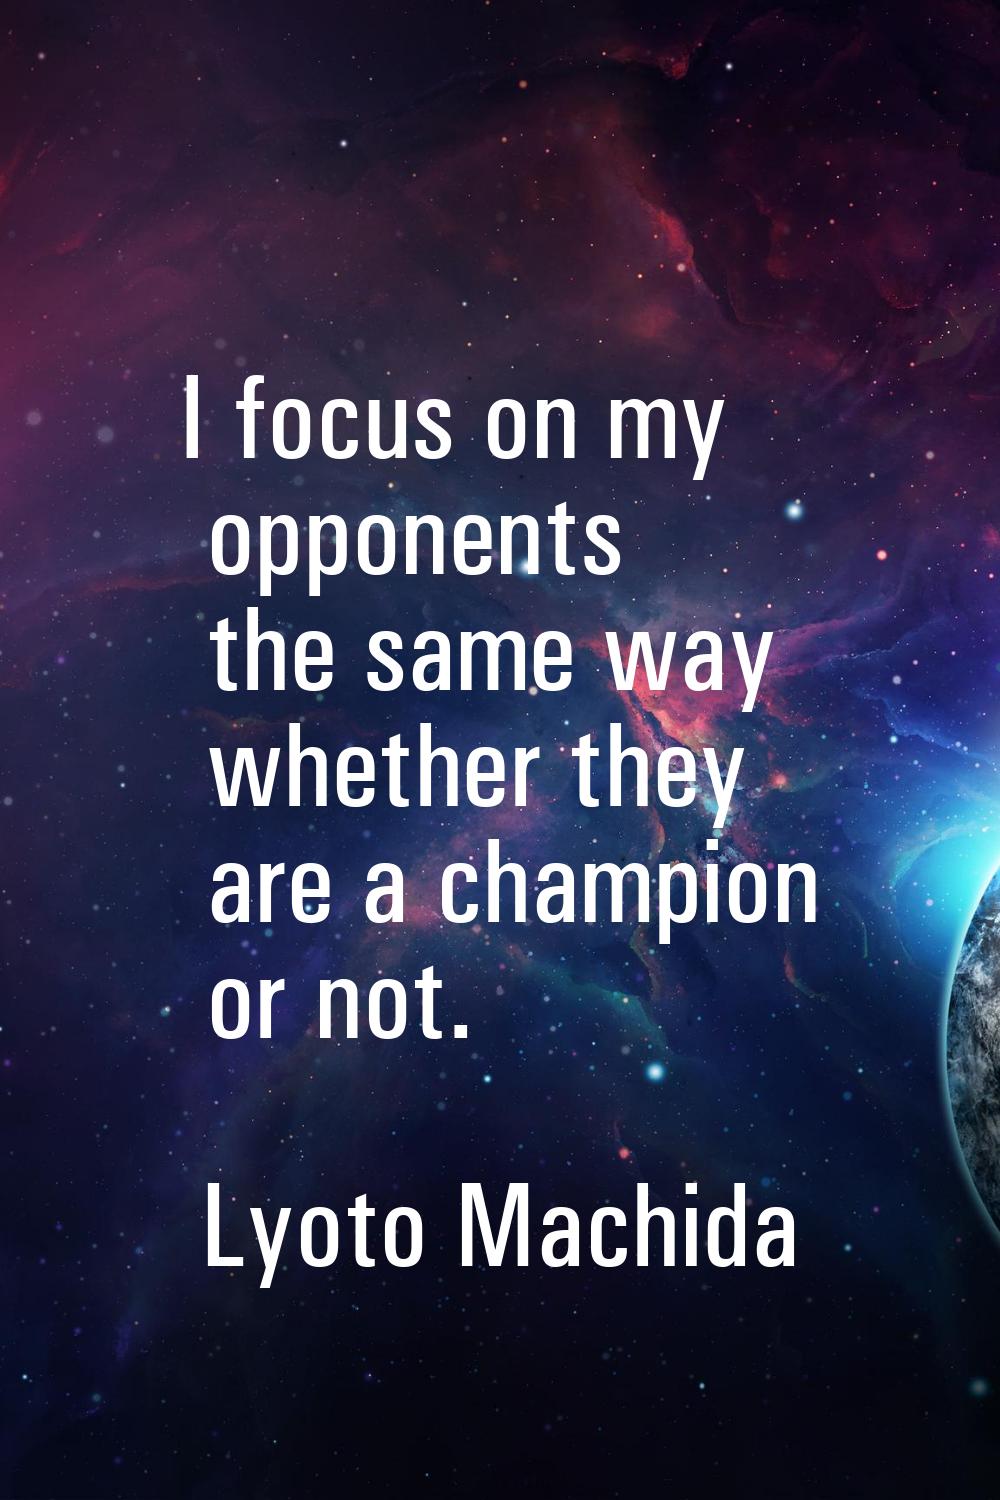 I focus on my opponents the same way whether they are a champion or not.